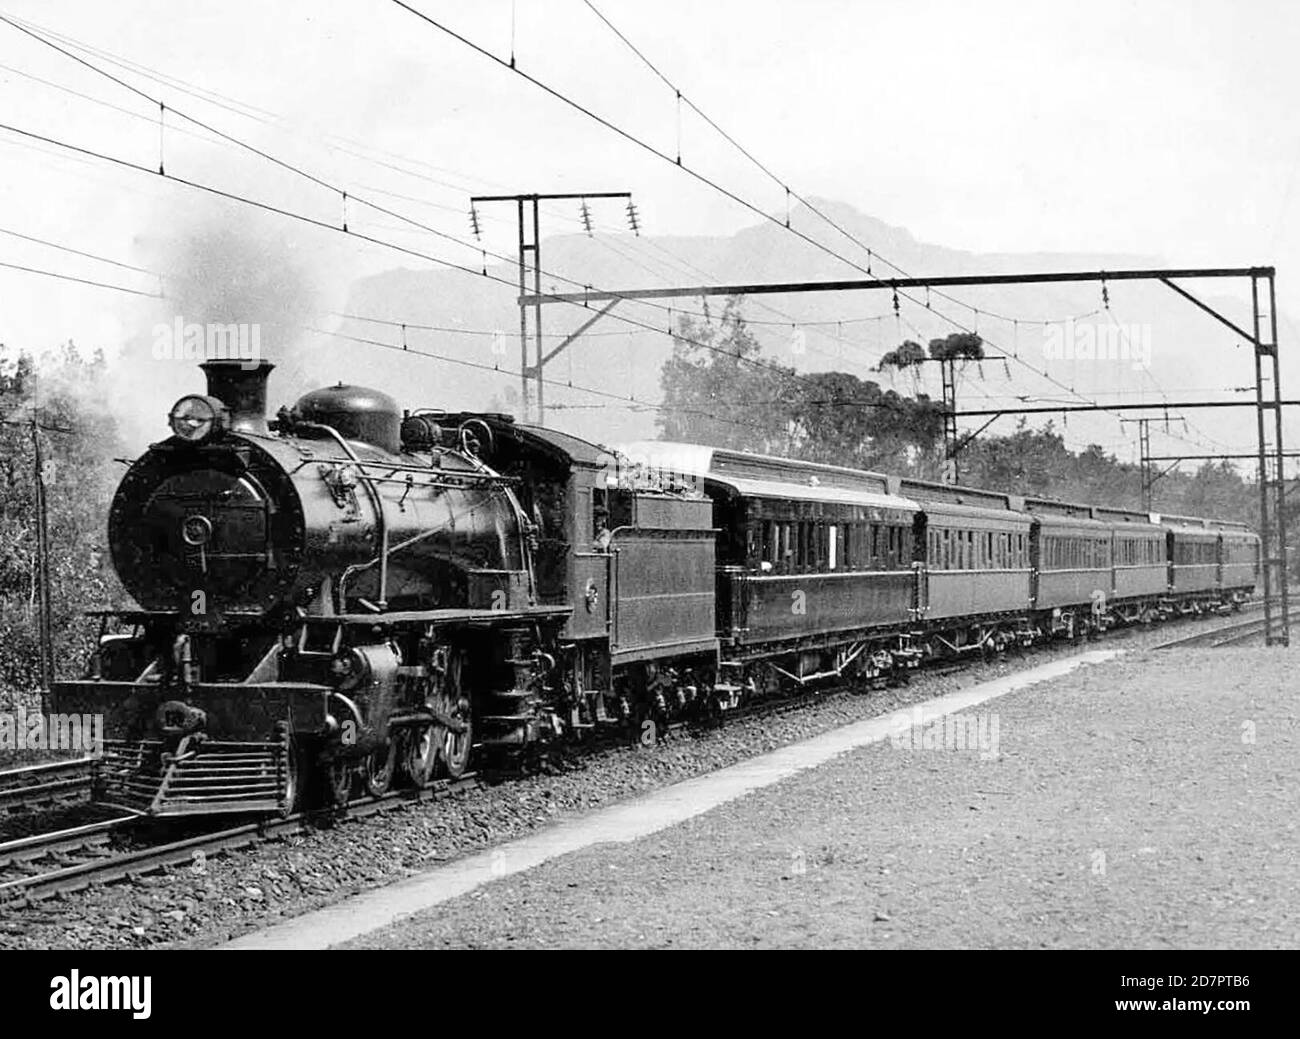 Historical Railroad Photo / Historical Locomotive:  SAR Class 10CR 778 (4-6-2) Ex CSAR 1014 Location: Woltemade No. 4 (Between today’s Thornton and Goodwood stations) ca. 1930 Stock Photo